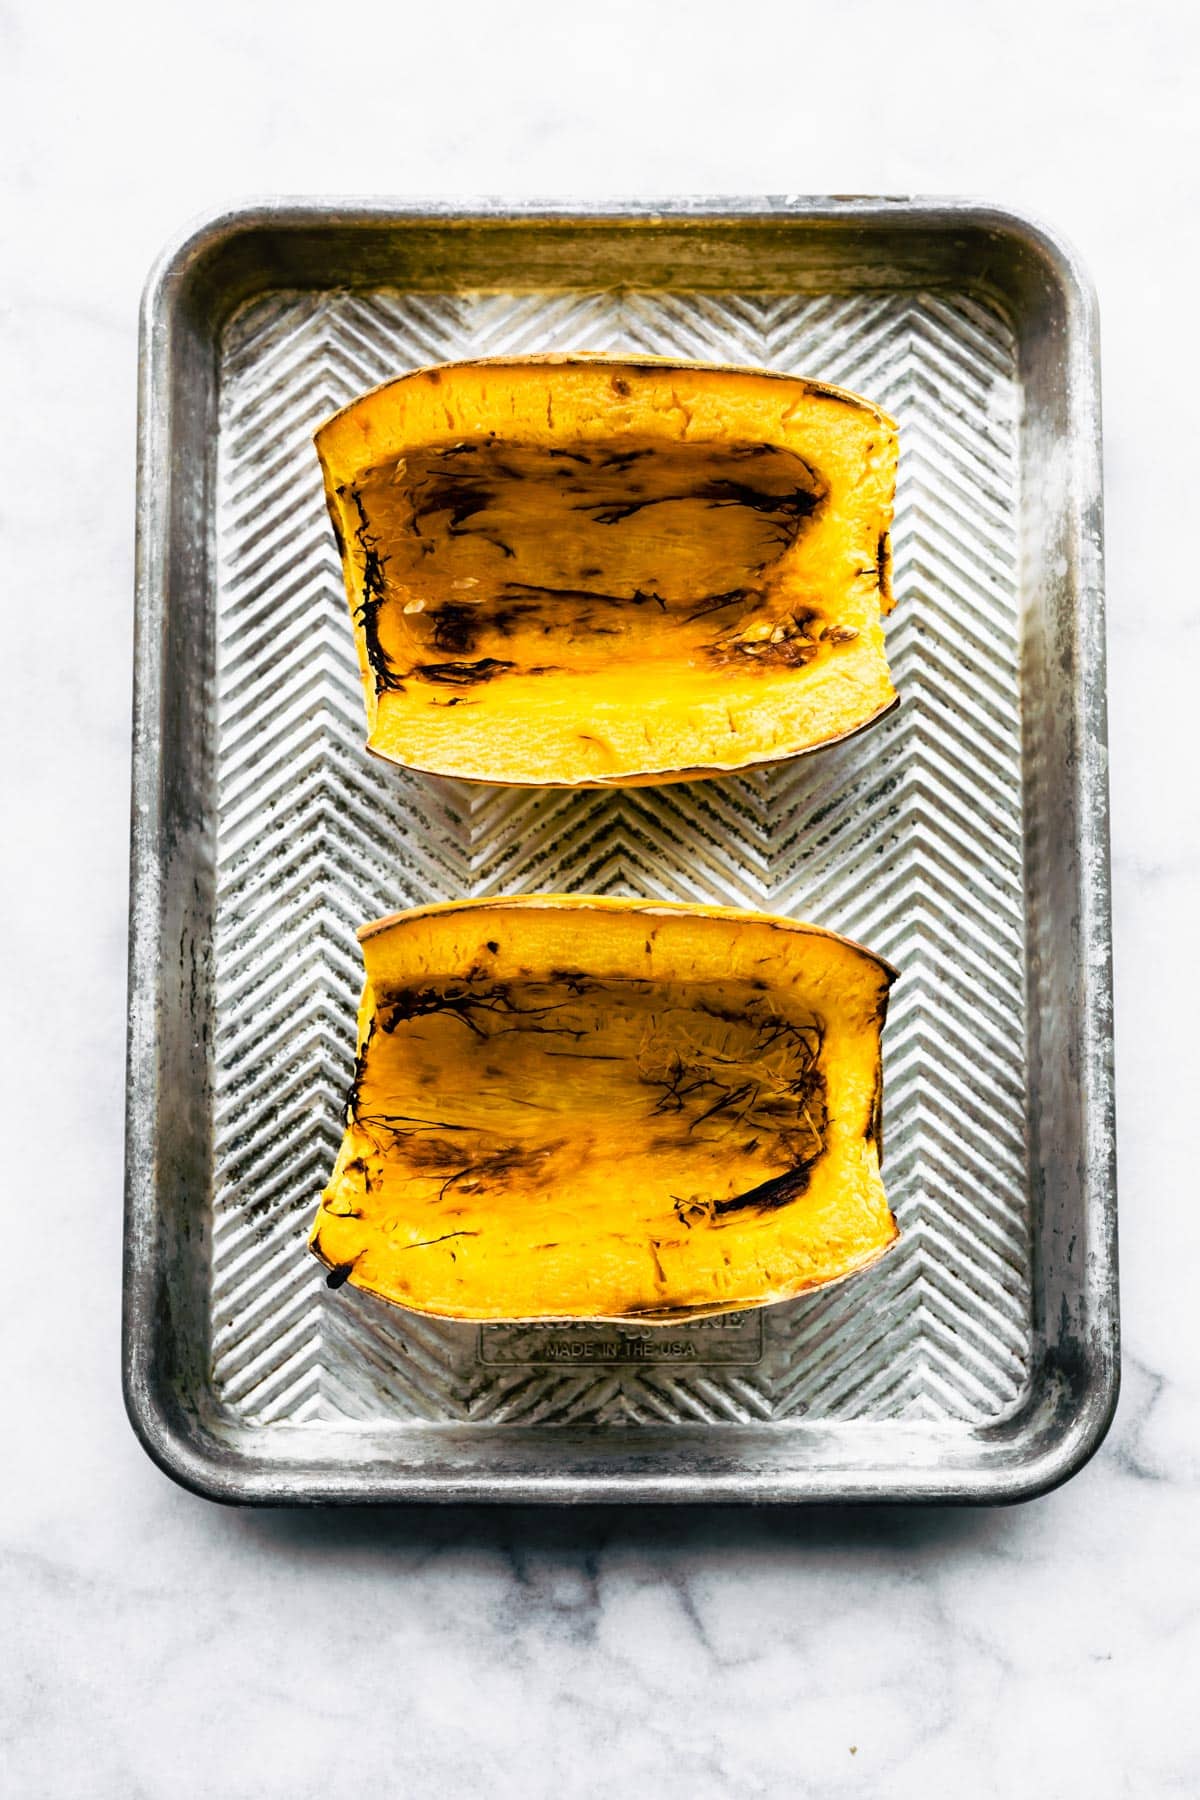 Two halves of baked spaghetti squash on a silver baking sheet